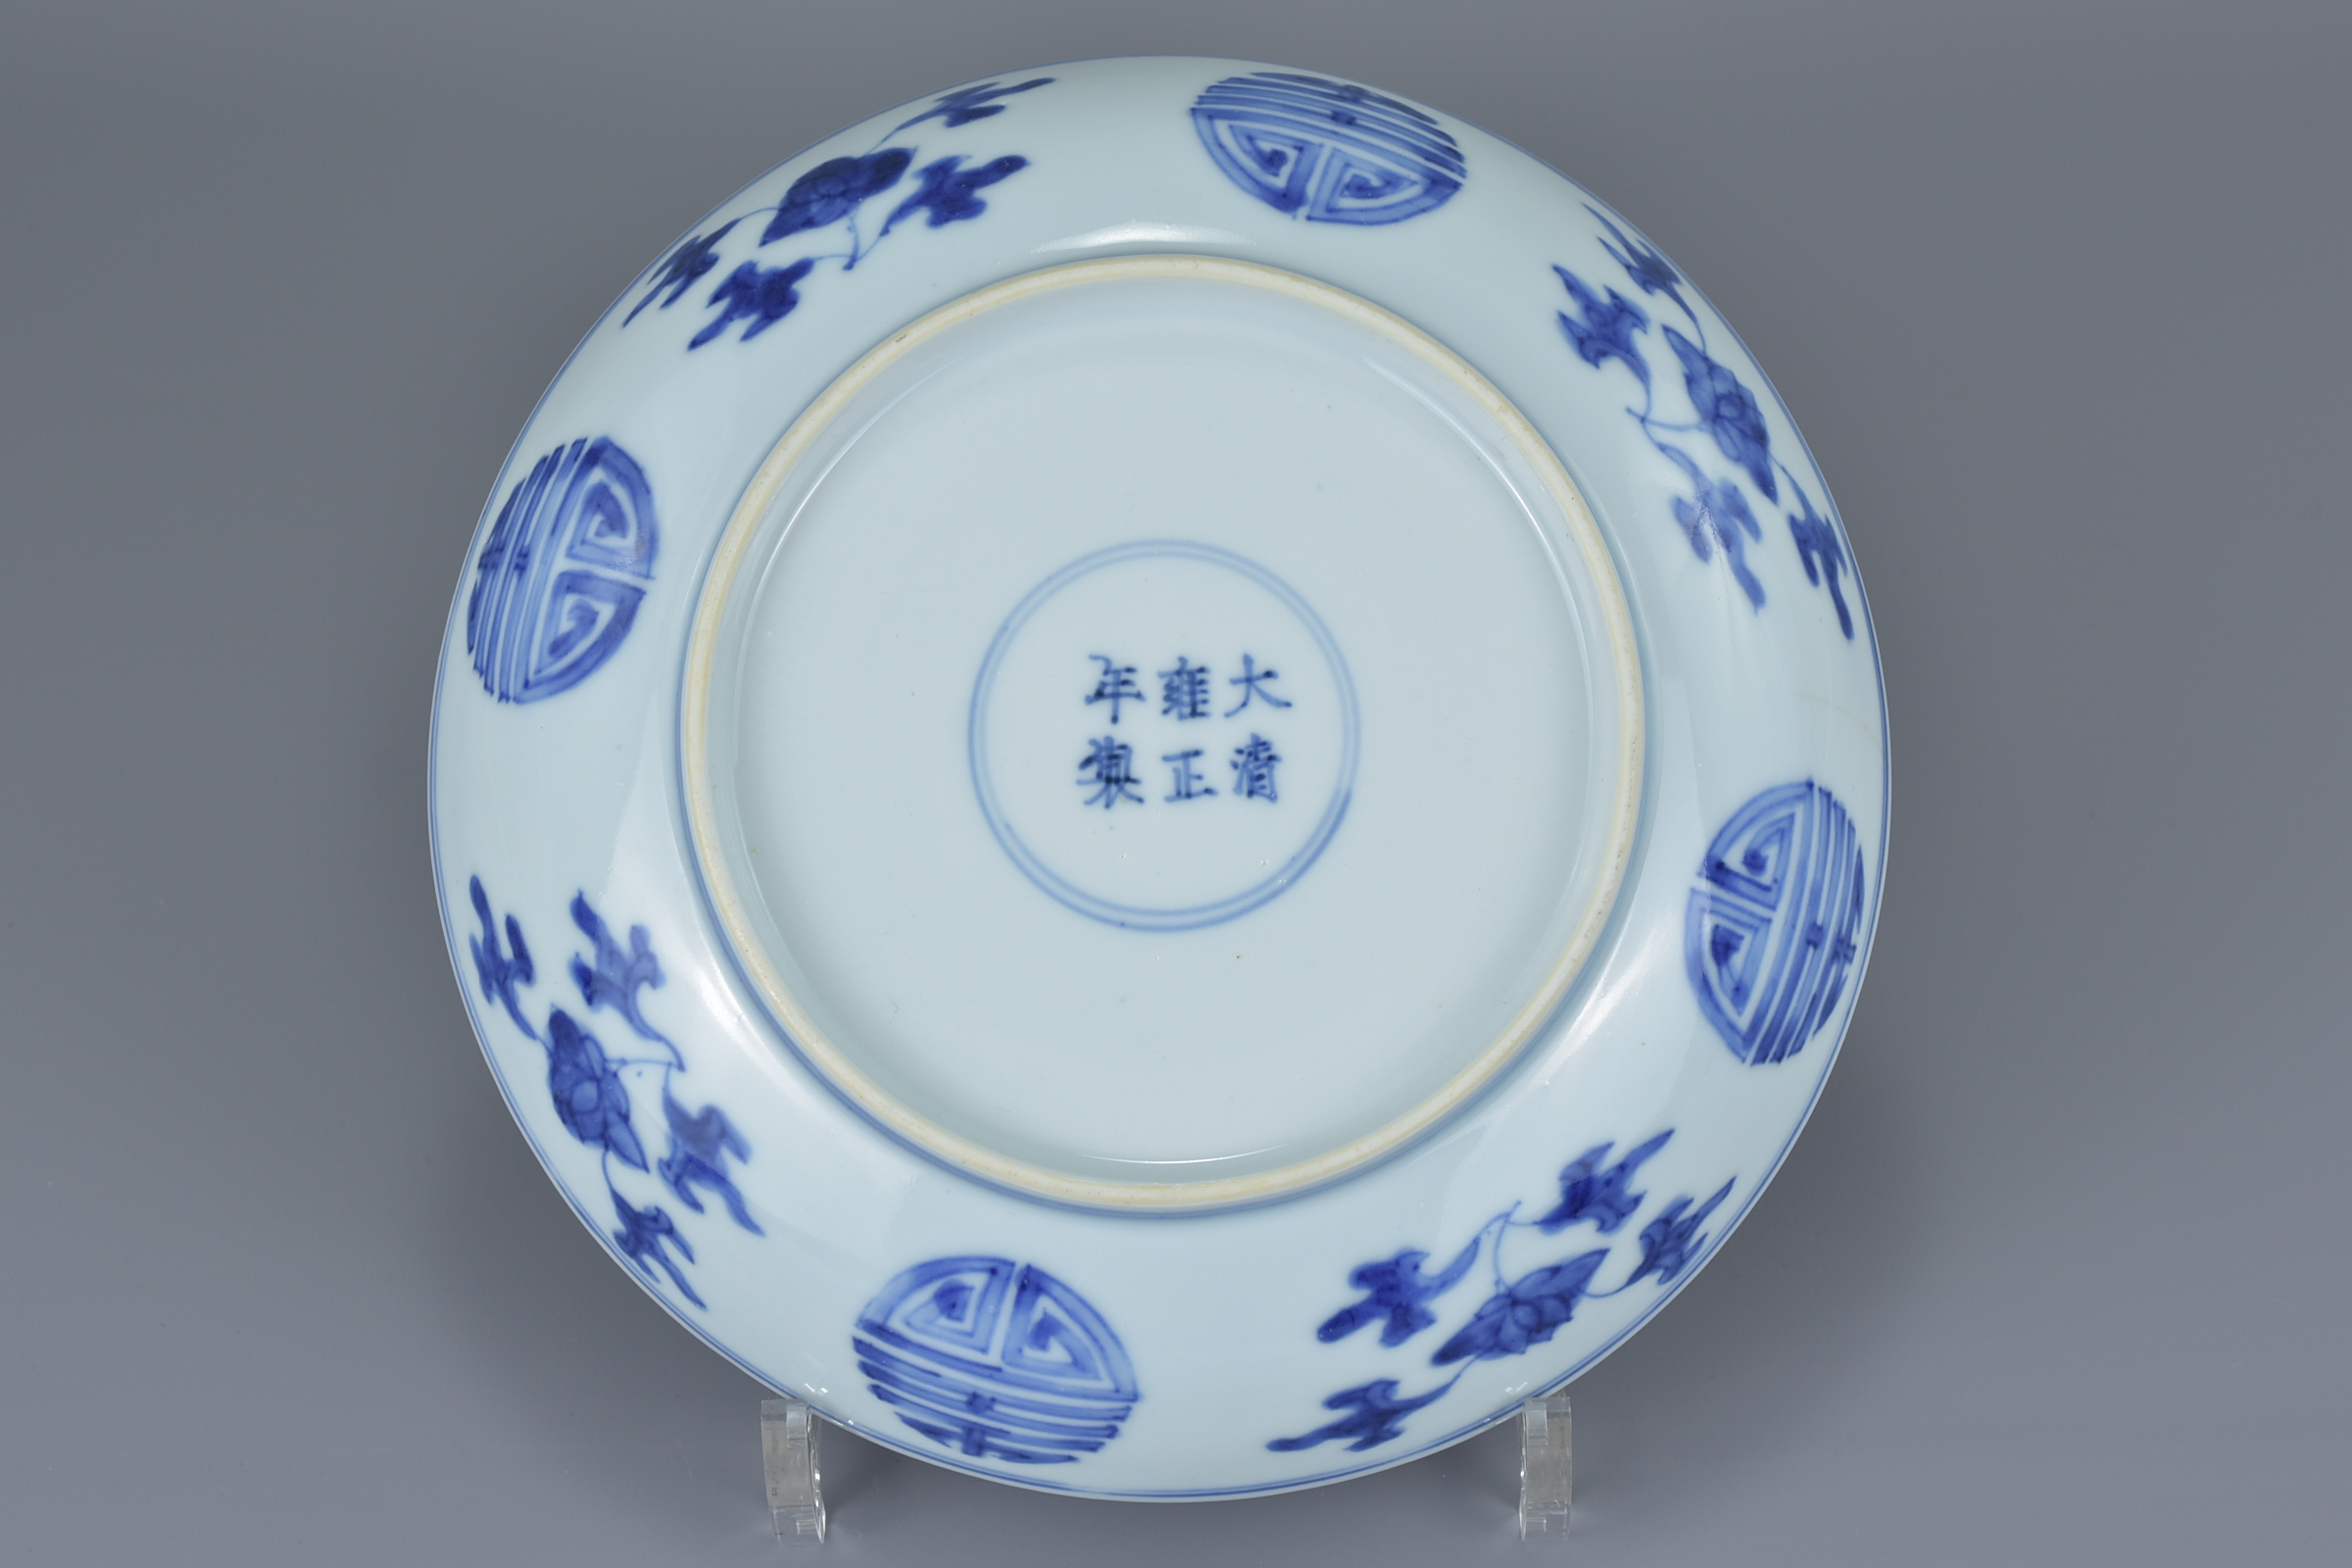 A Chinese 18th century blue and white porcelain dish decorated with 'Shou' characters amongst floral - Image 3 of 5